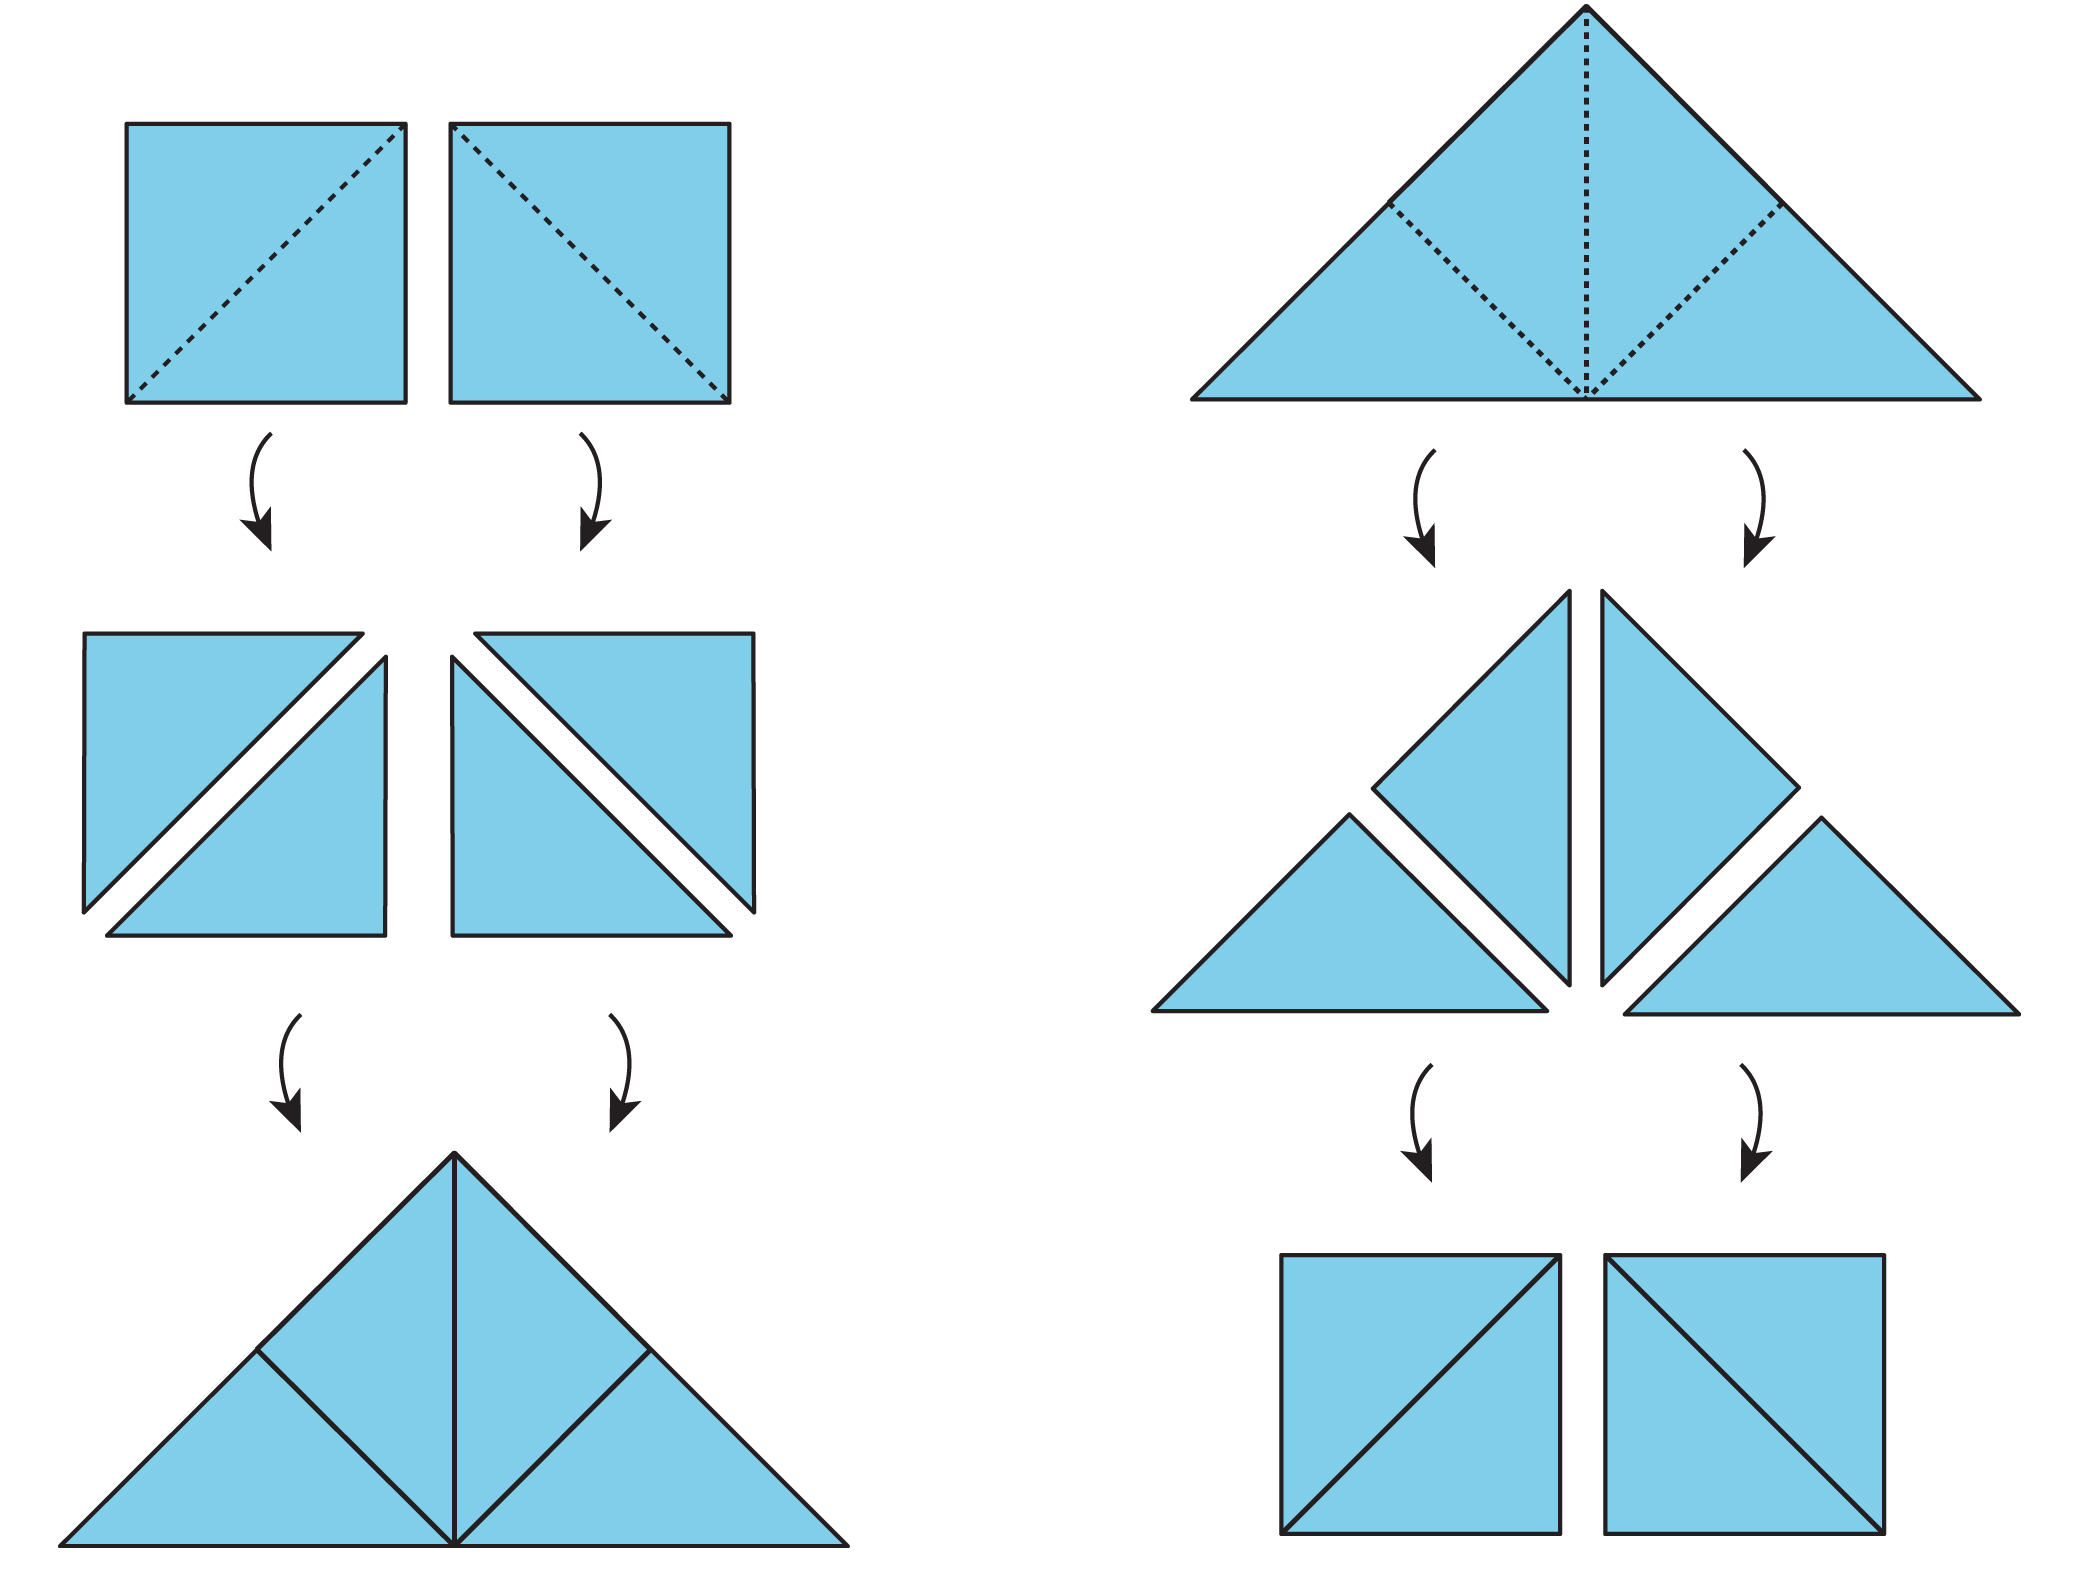 An image of two squares, which are then decomposed into four triangles, which are then rearranged into one large triangle. Another image of a large triangle that is decomposed into four smaller triangles, and then rearranged into two squares.